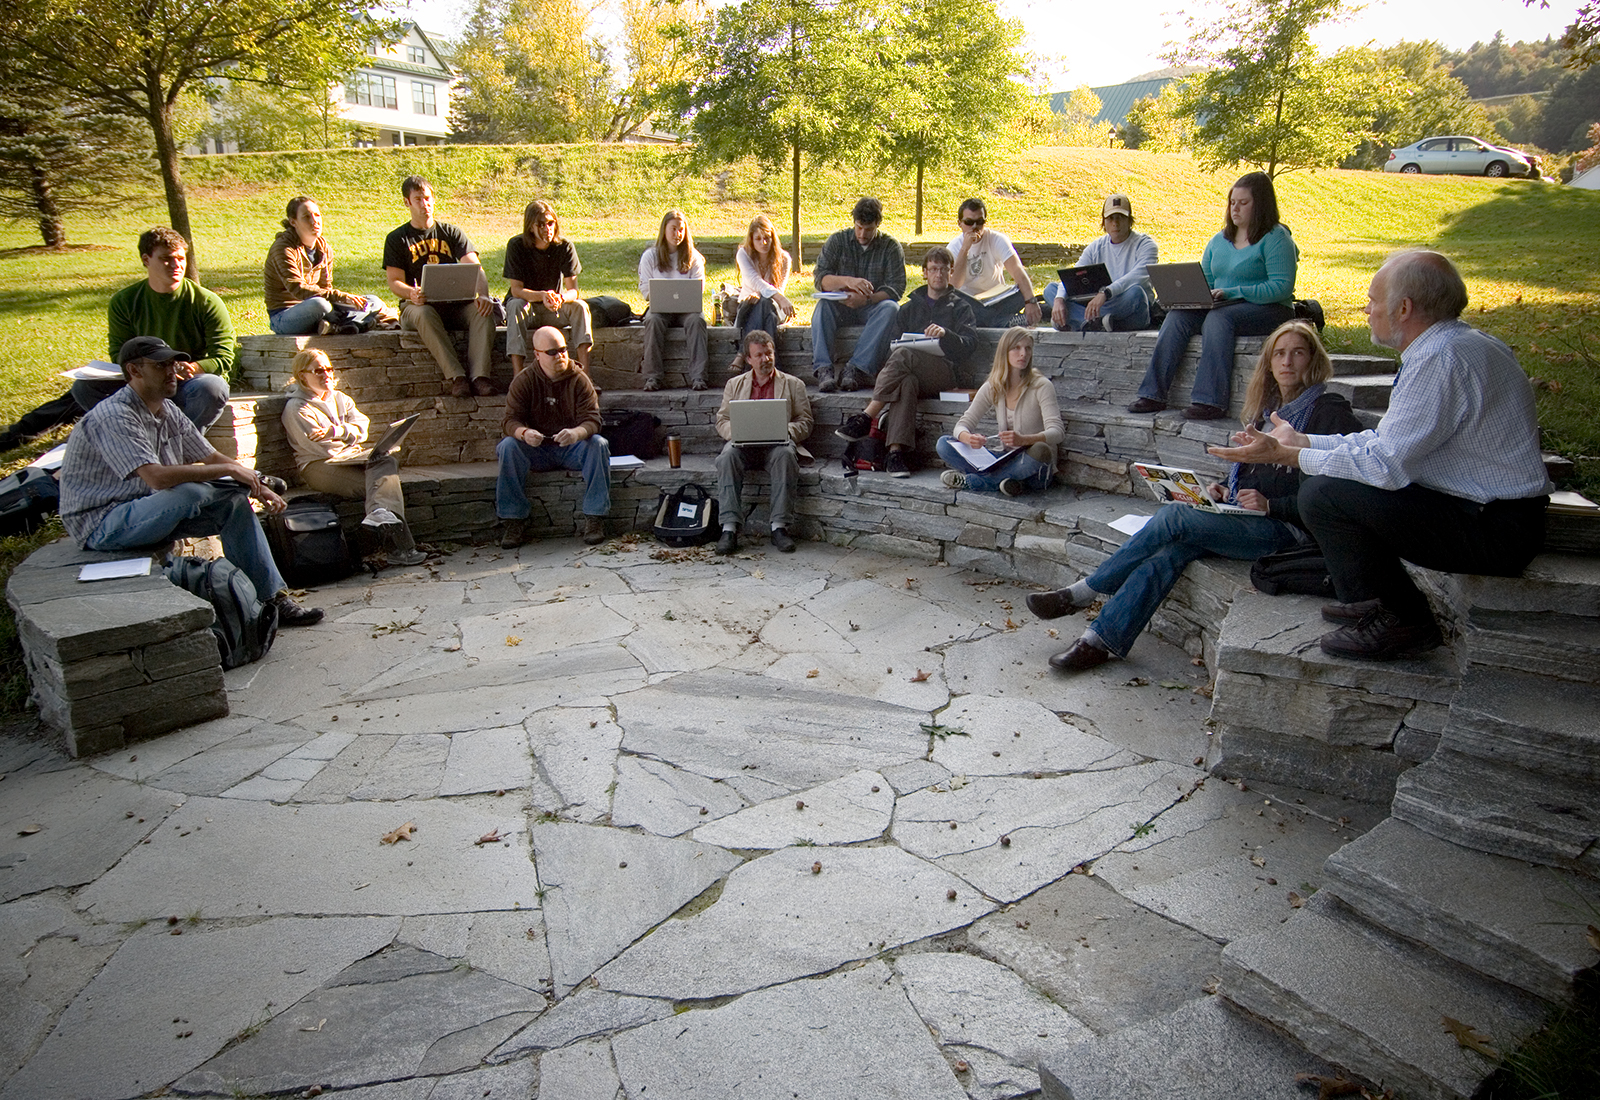 An outdoor classroom at Vermont Law School